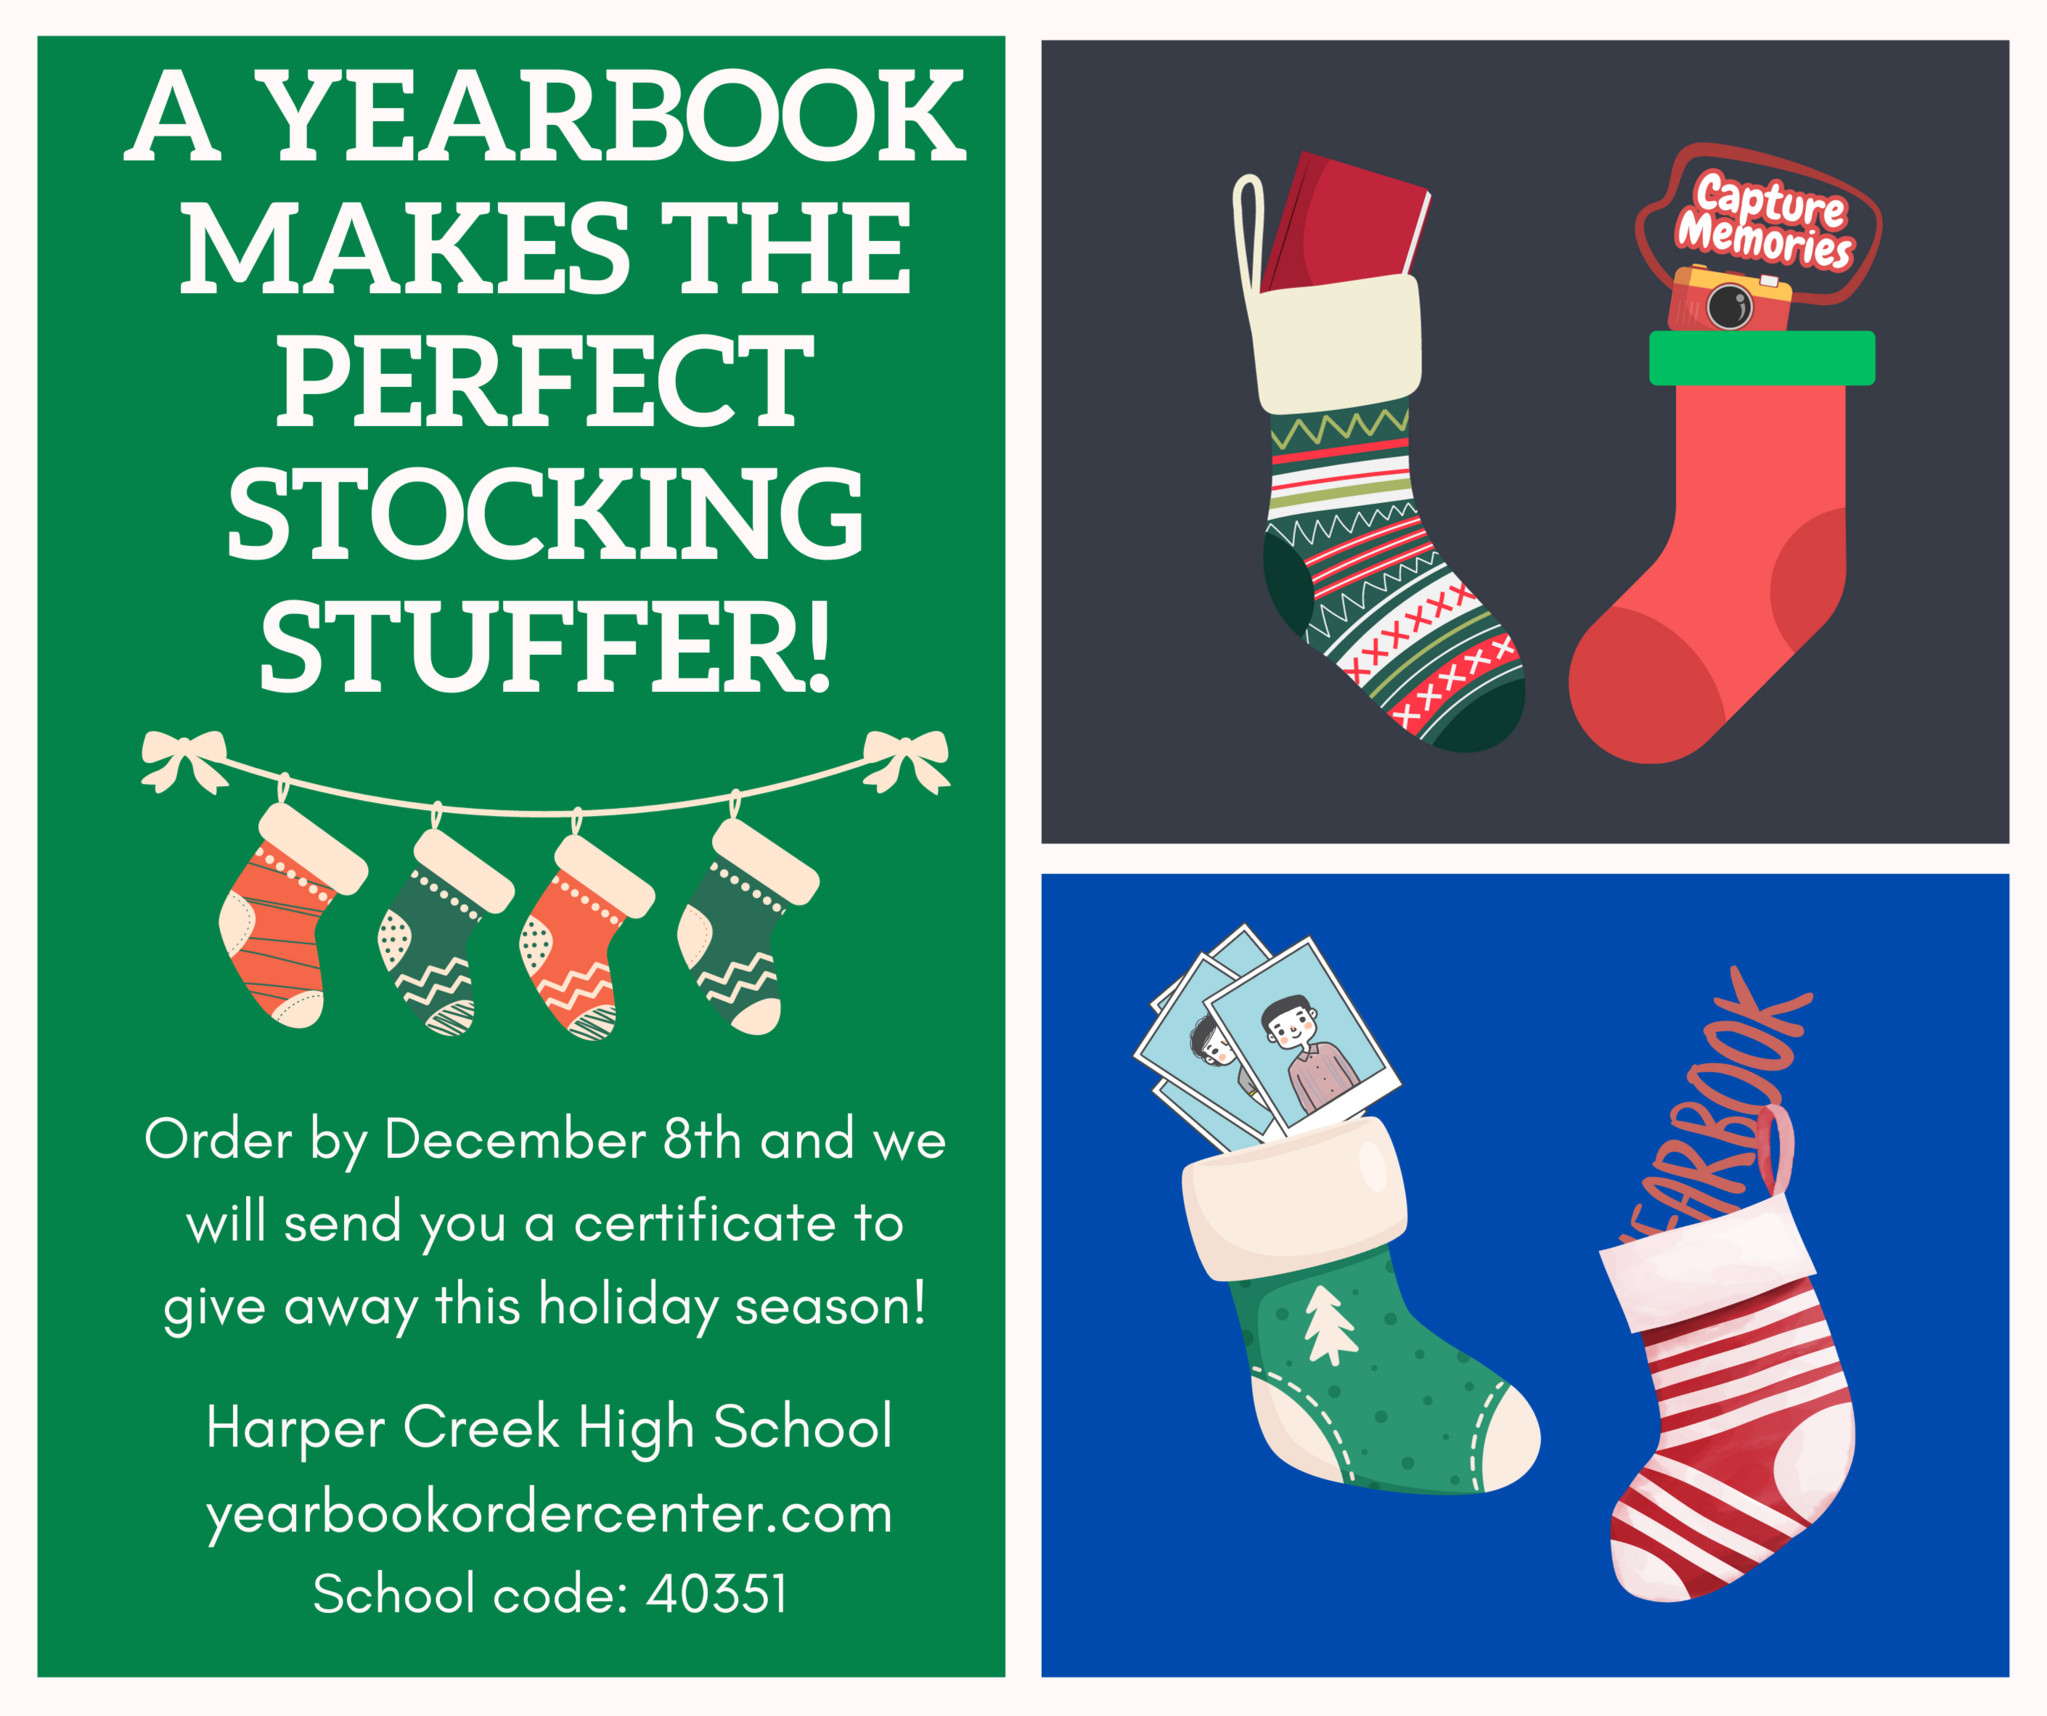 A yearbook makes the perfect stocking stuffer! Order by Dec 6th and we will send you a gift certificate to give away.  Visit yearbookordercenter.com our school code is 40351.